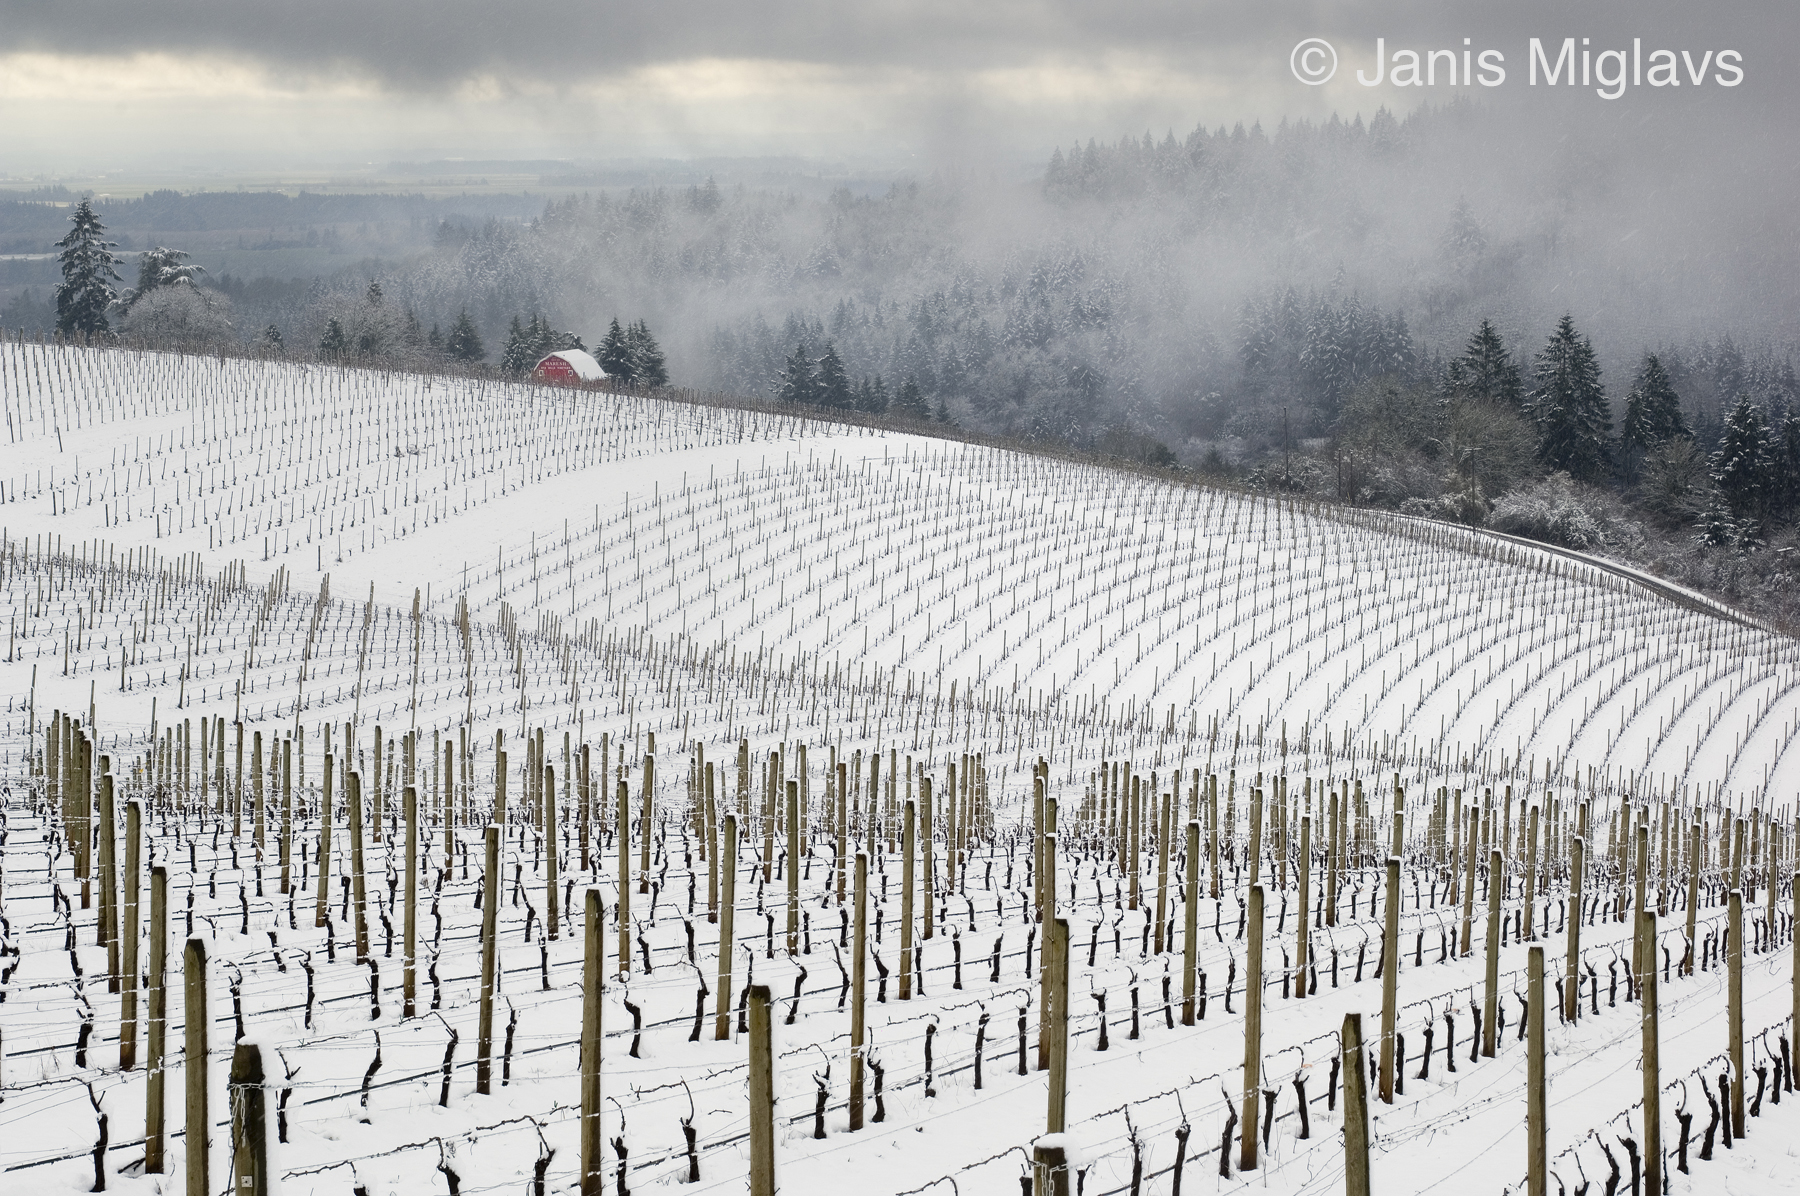 Red barn in snow-covered vineyards